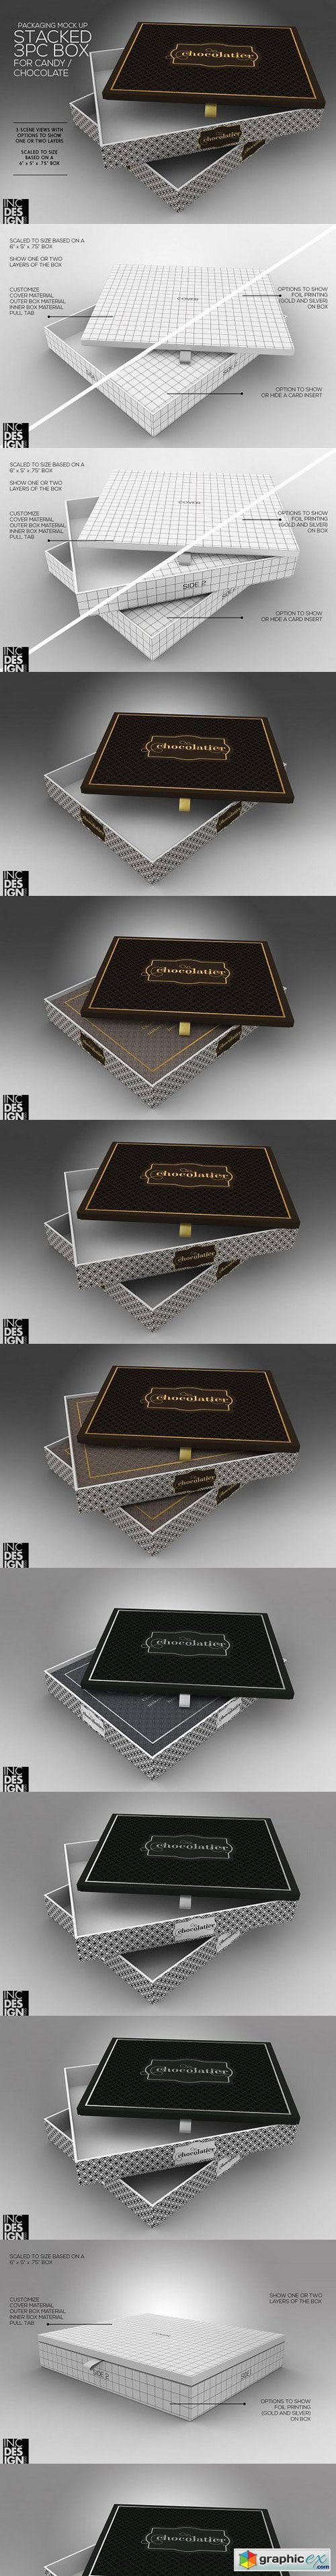 Stacked 3pc Box Mock Up